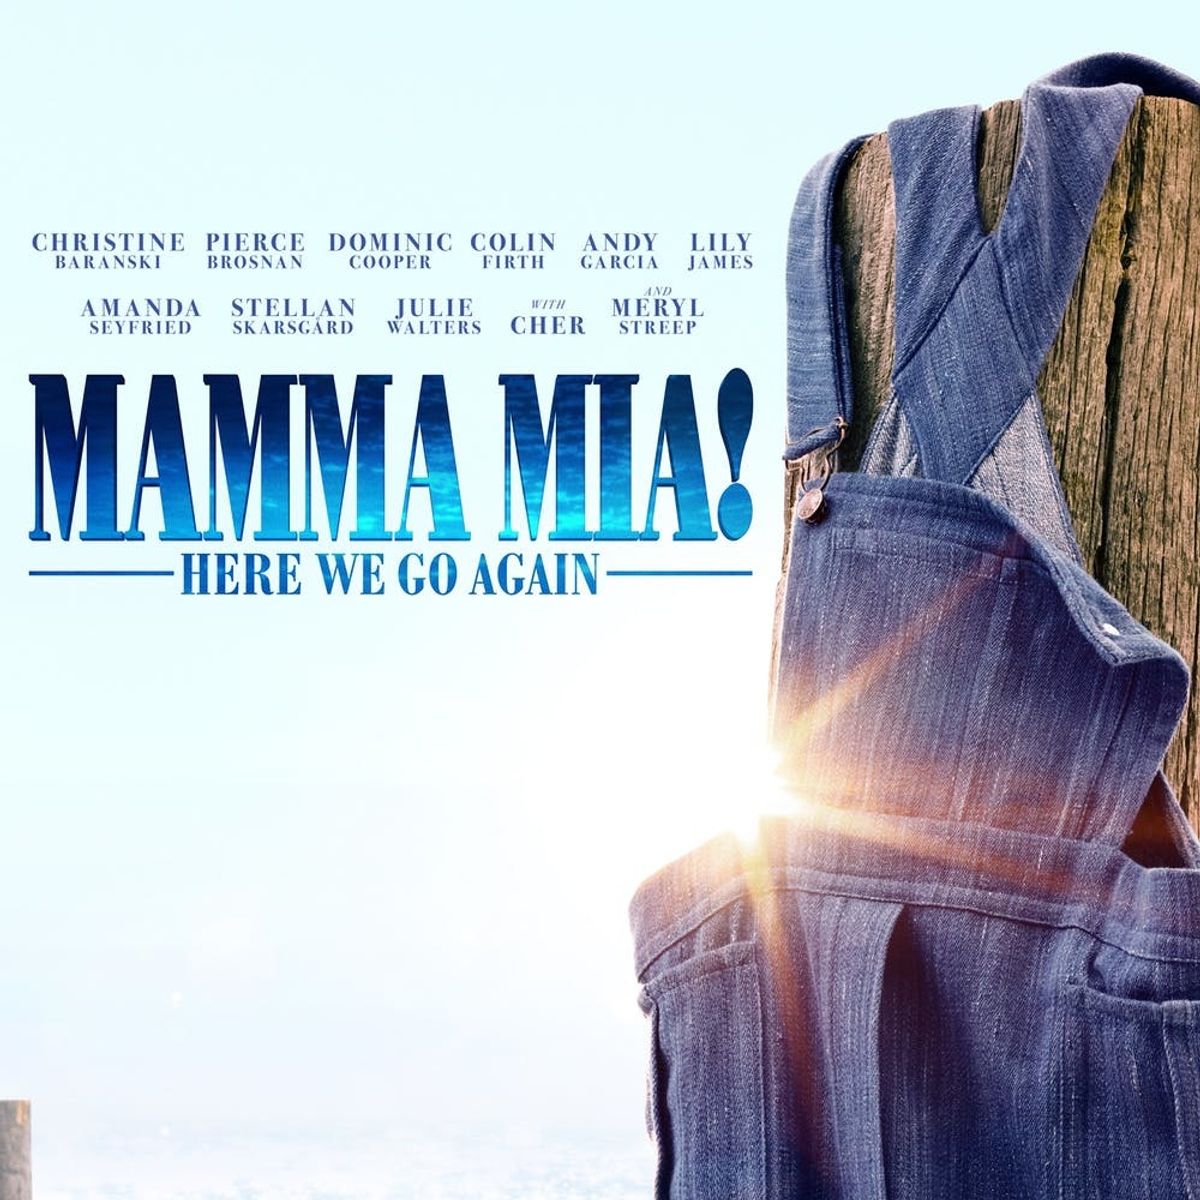 The ‘Mamma Mia!’ Sequel Trailer Just Dropped and We Have One Big Question